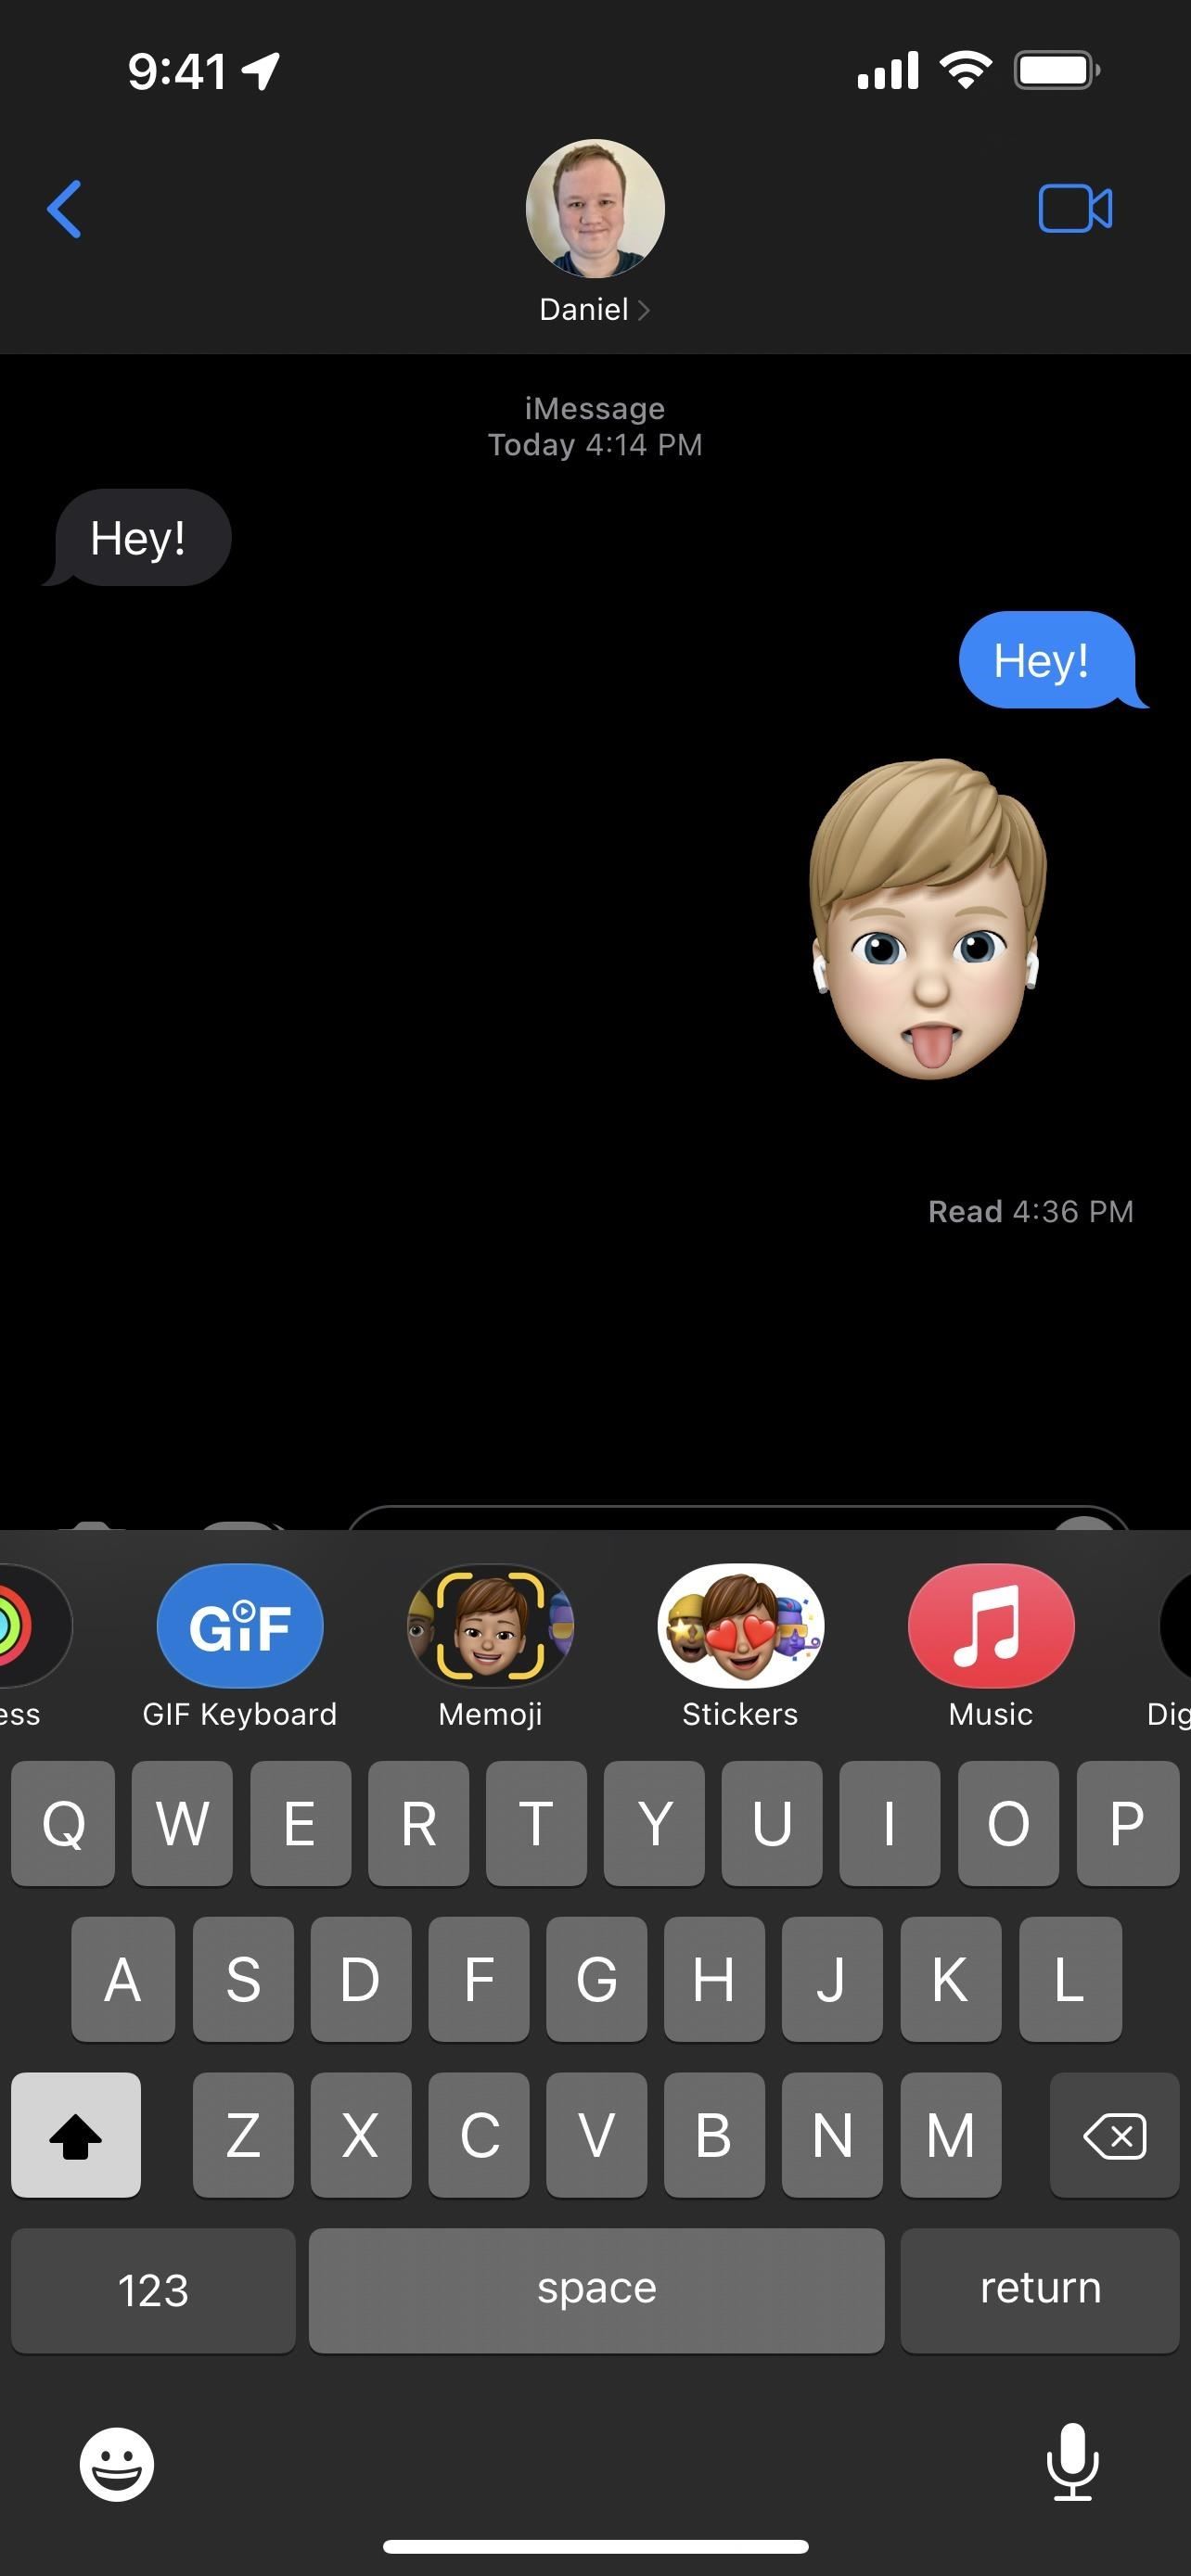 Send Full-Screen Memoji Explosions in iMessage Chats from Your iPhone or iPad